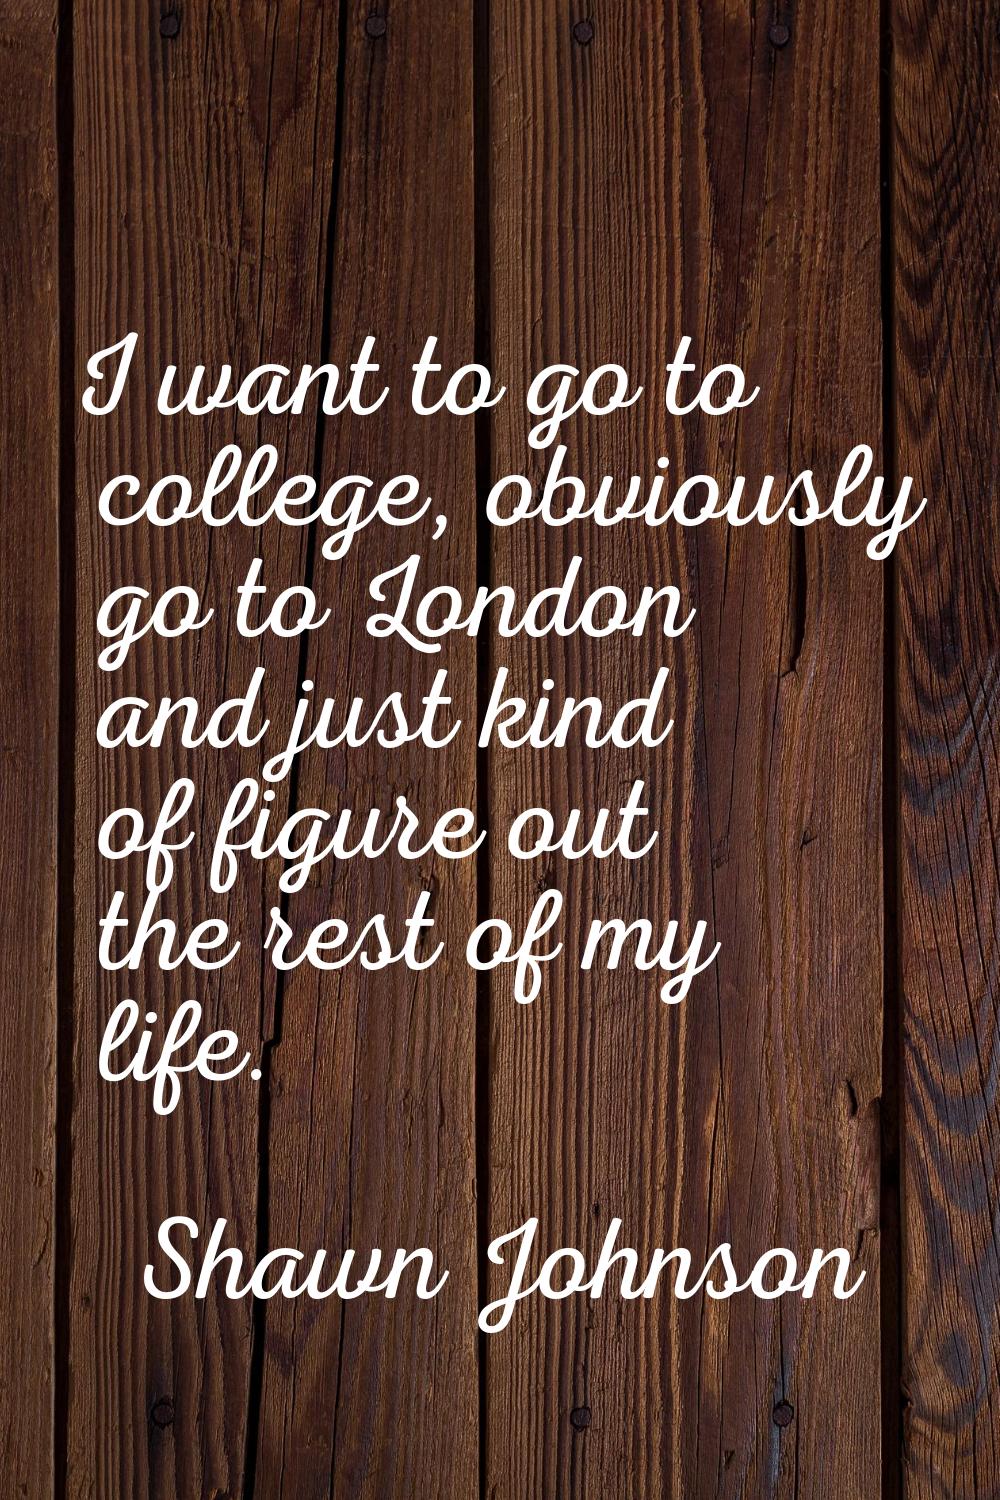 I want to go to college, obviously go to London and just kind of figure out the rest of my life.